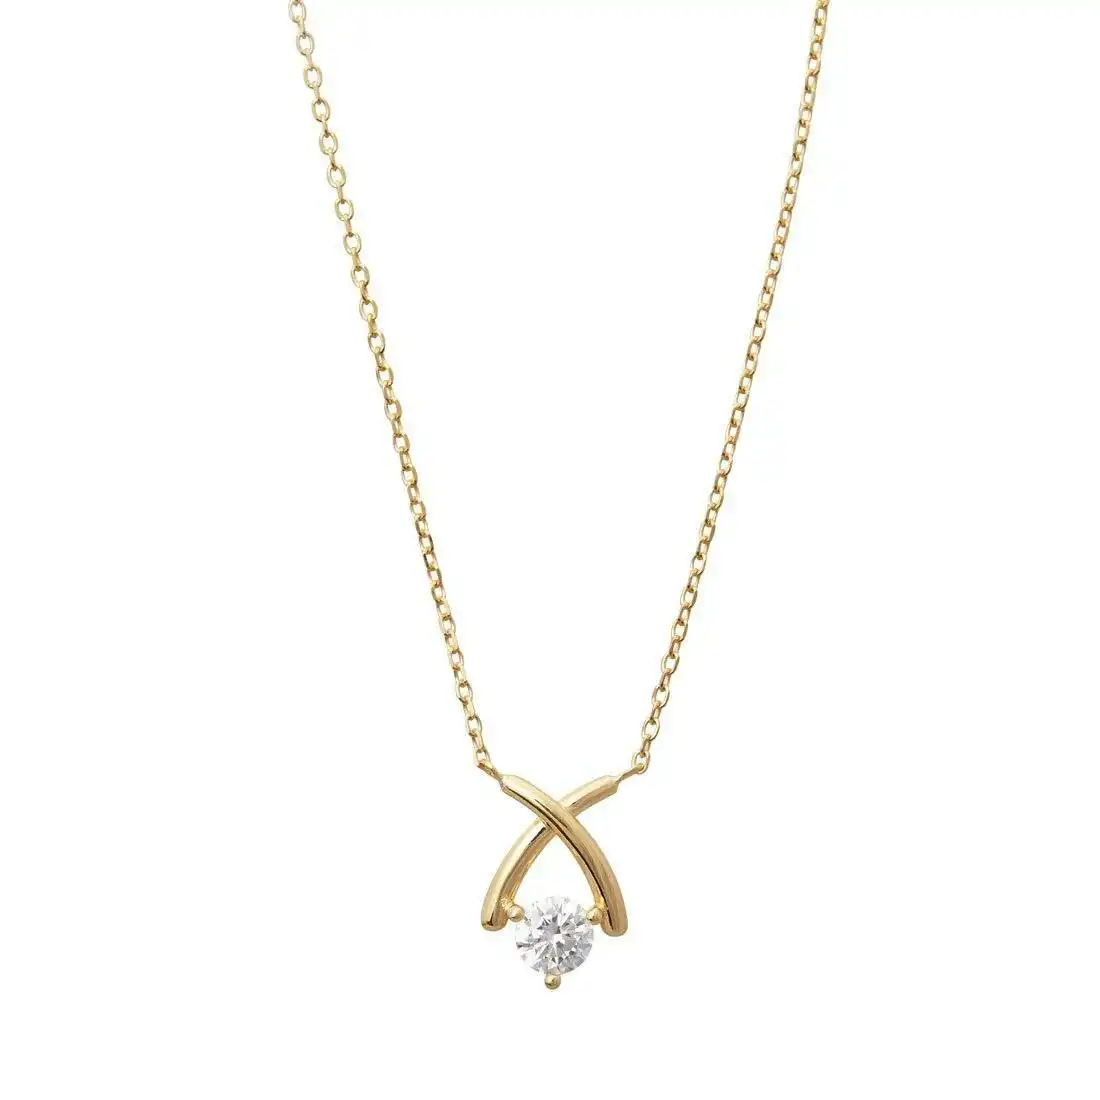 X O Cubic Zirconia Necklace in 9ct Yellow Gold Silver Infused